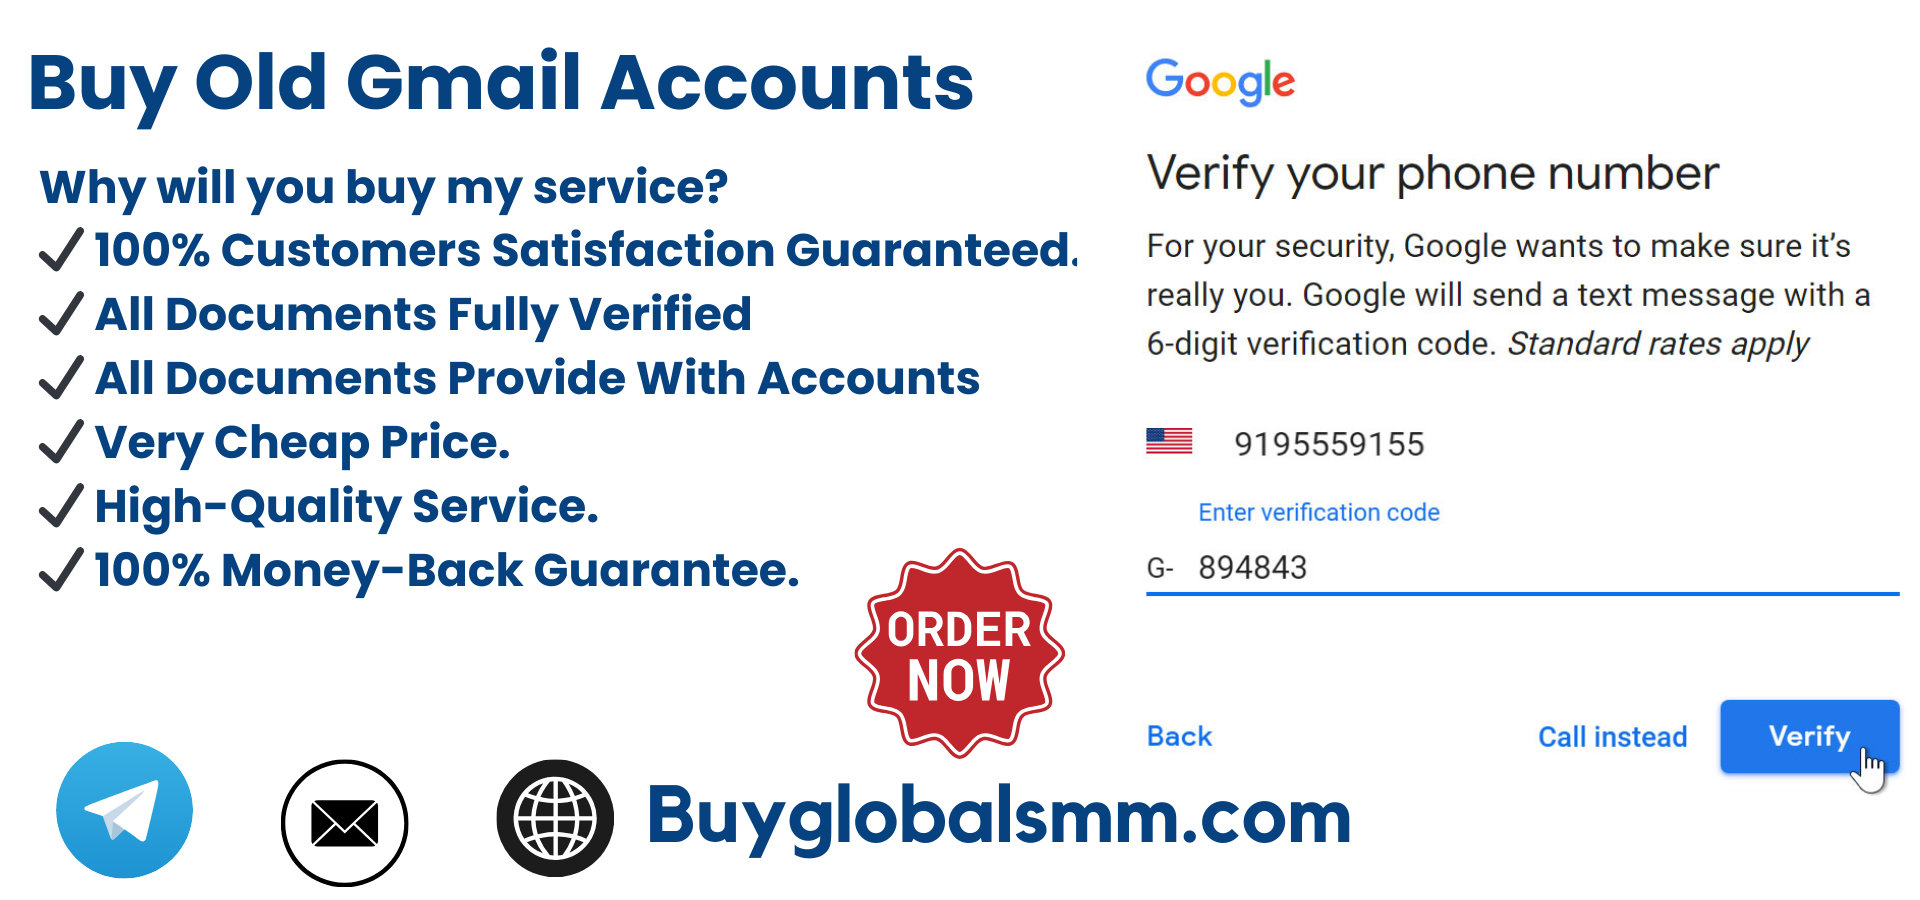 Buy Old Gmail Accounts
